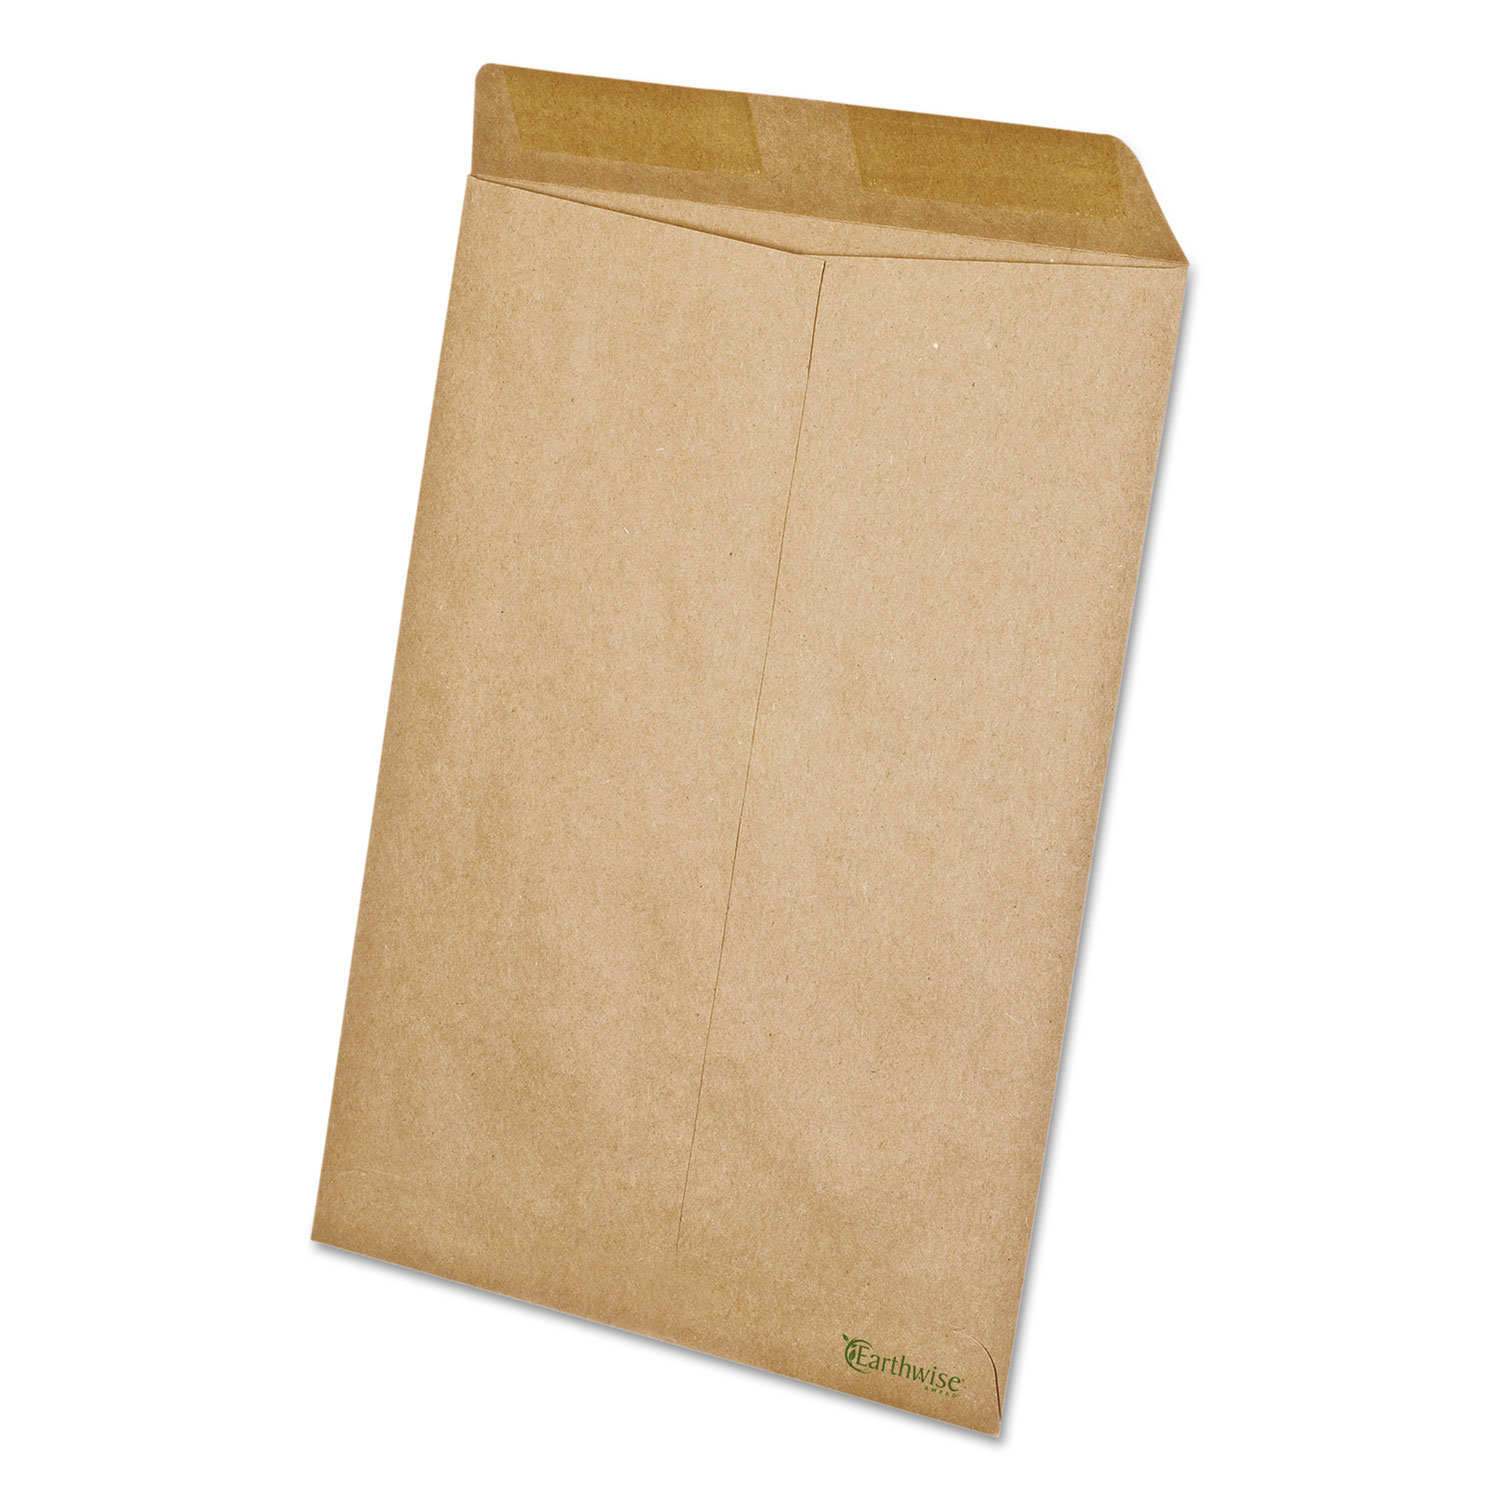 Earthwise by Ampad 100% Recycled Paper Catalog Envelope, 9 x 12, Kraft, 110/BX